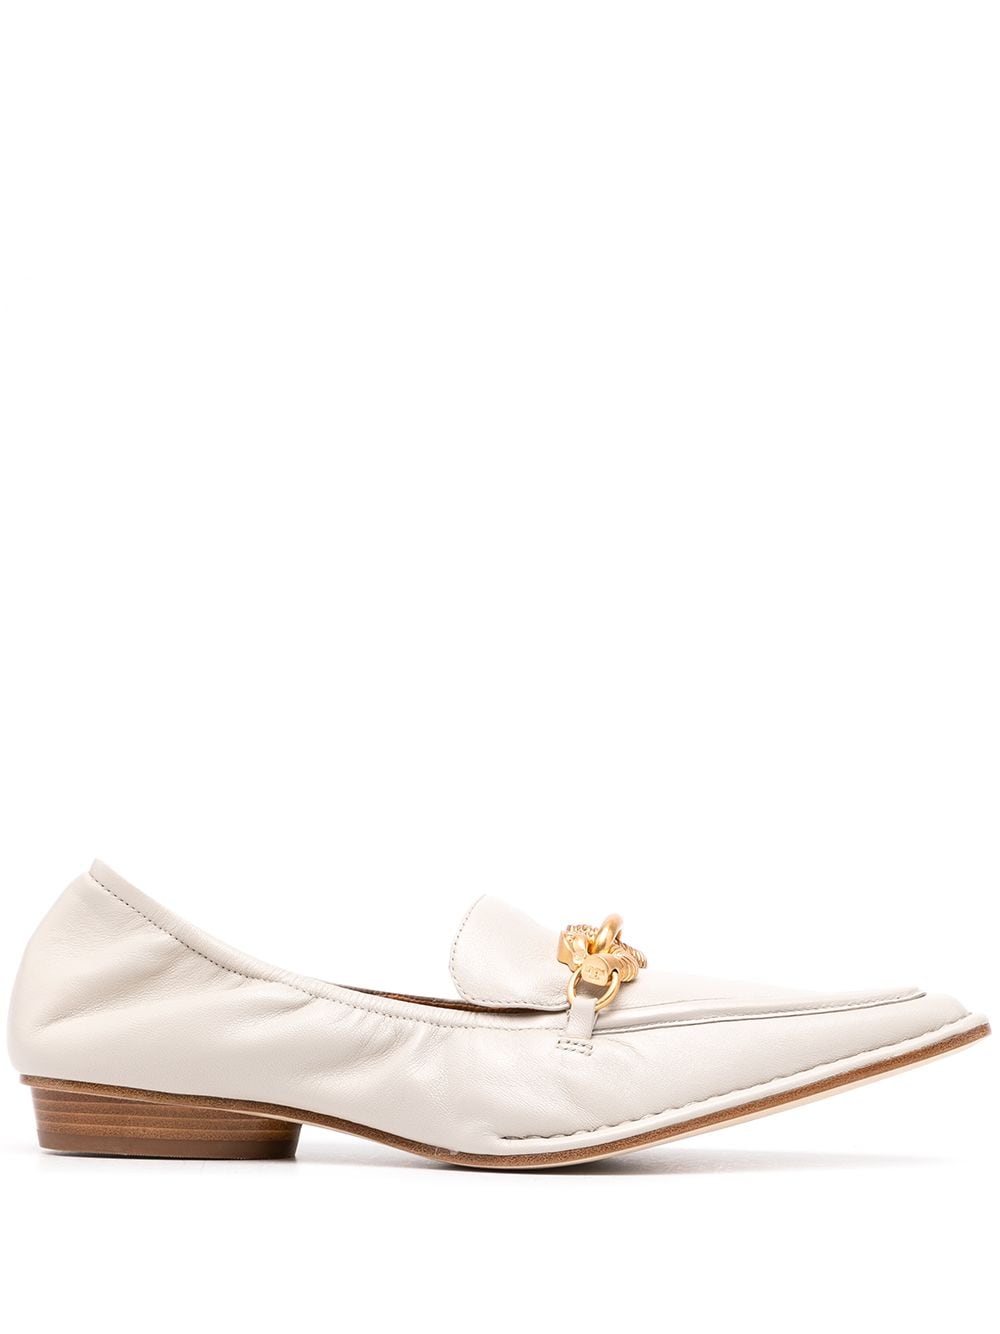 TORY BURCH JESSA POINTED-TOE LOAFERS